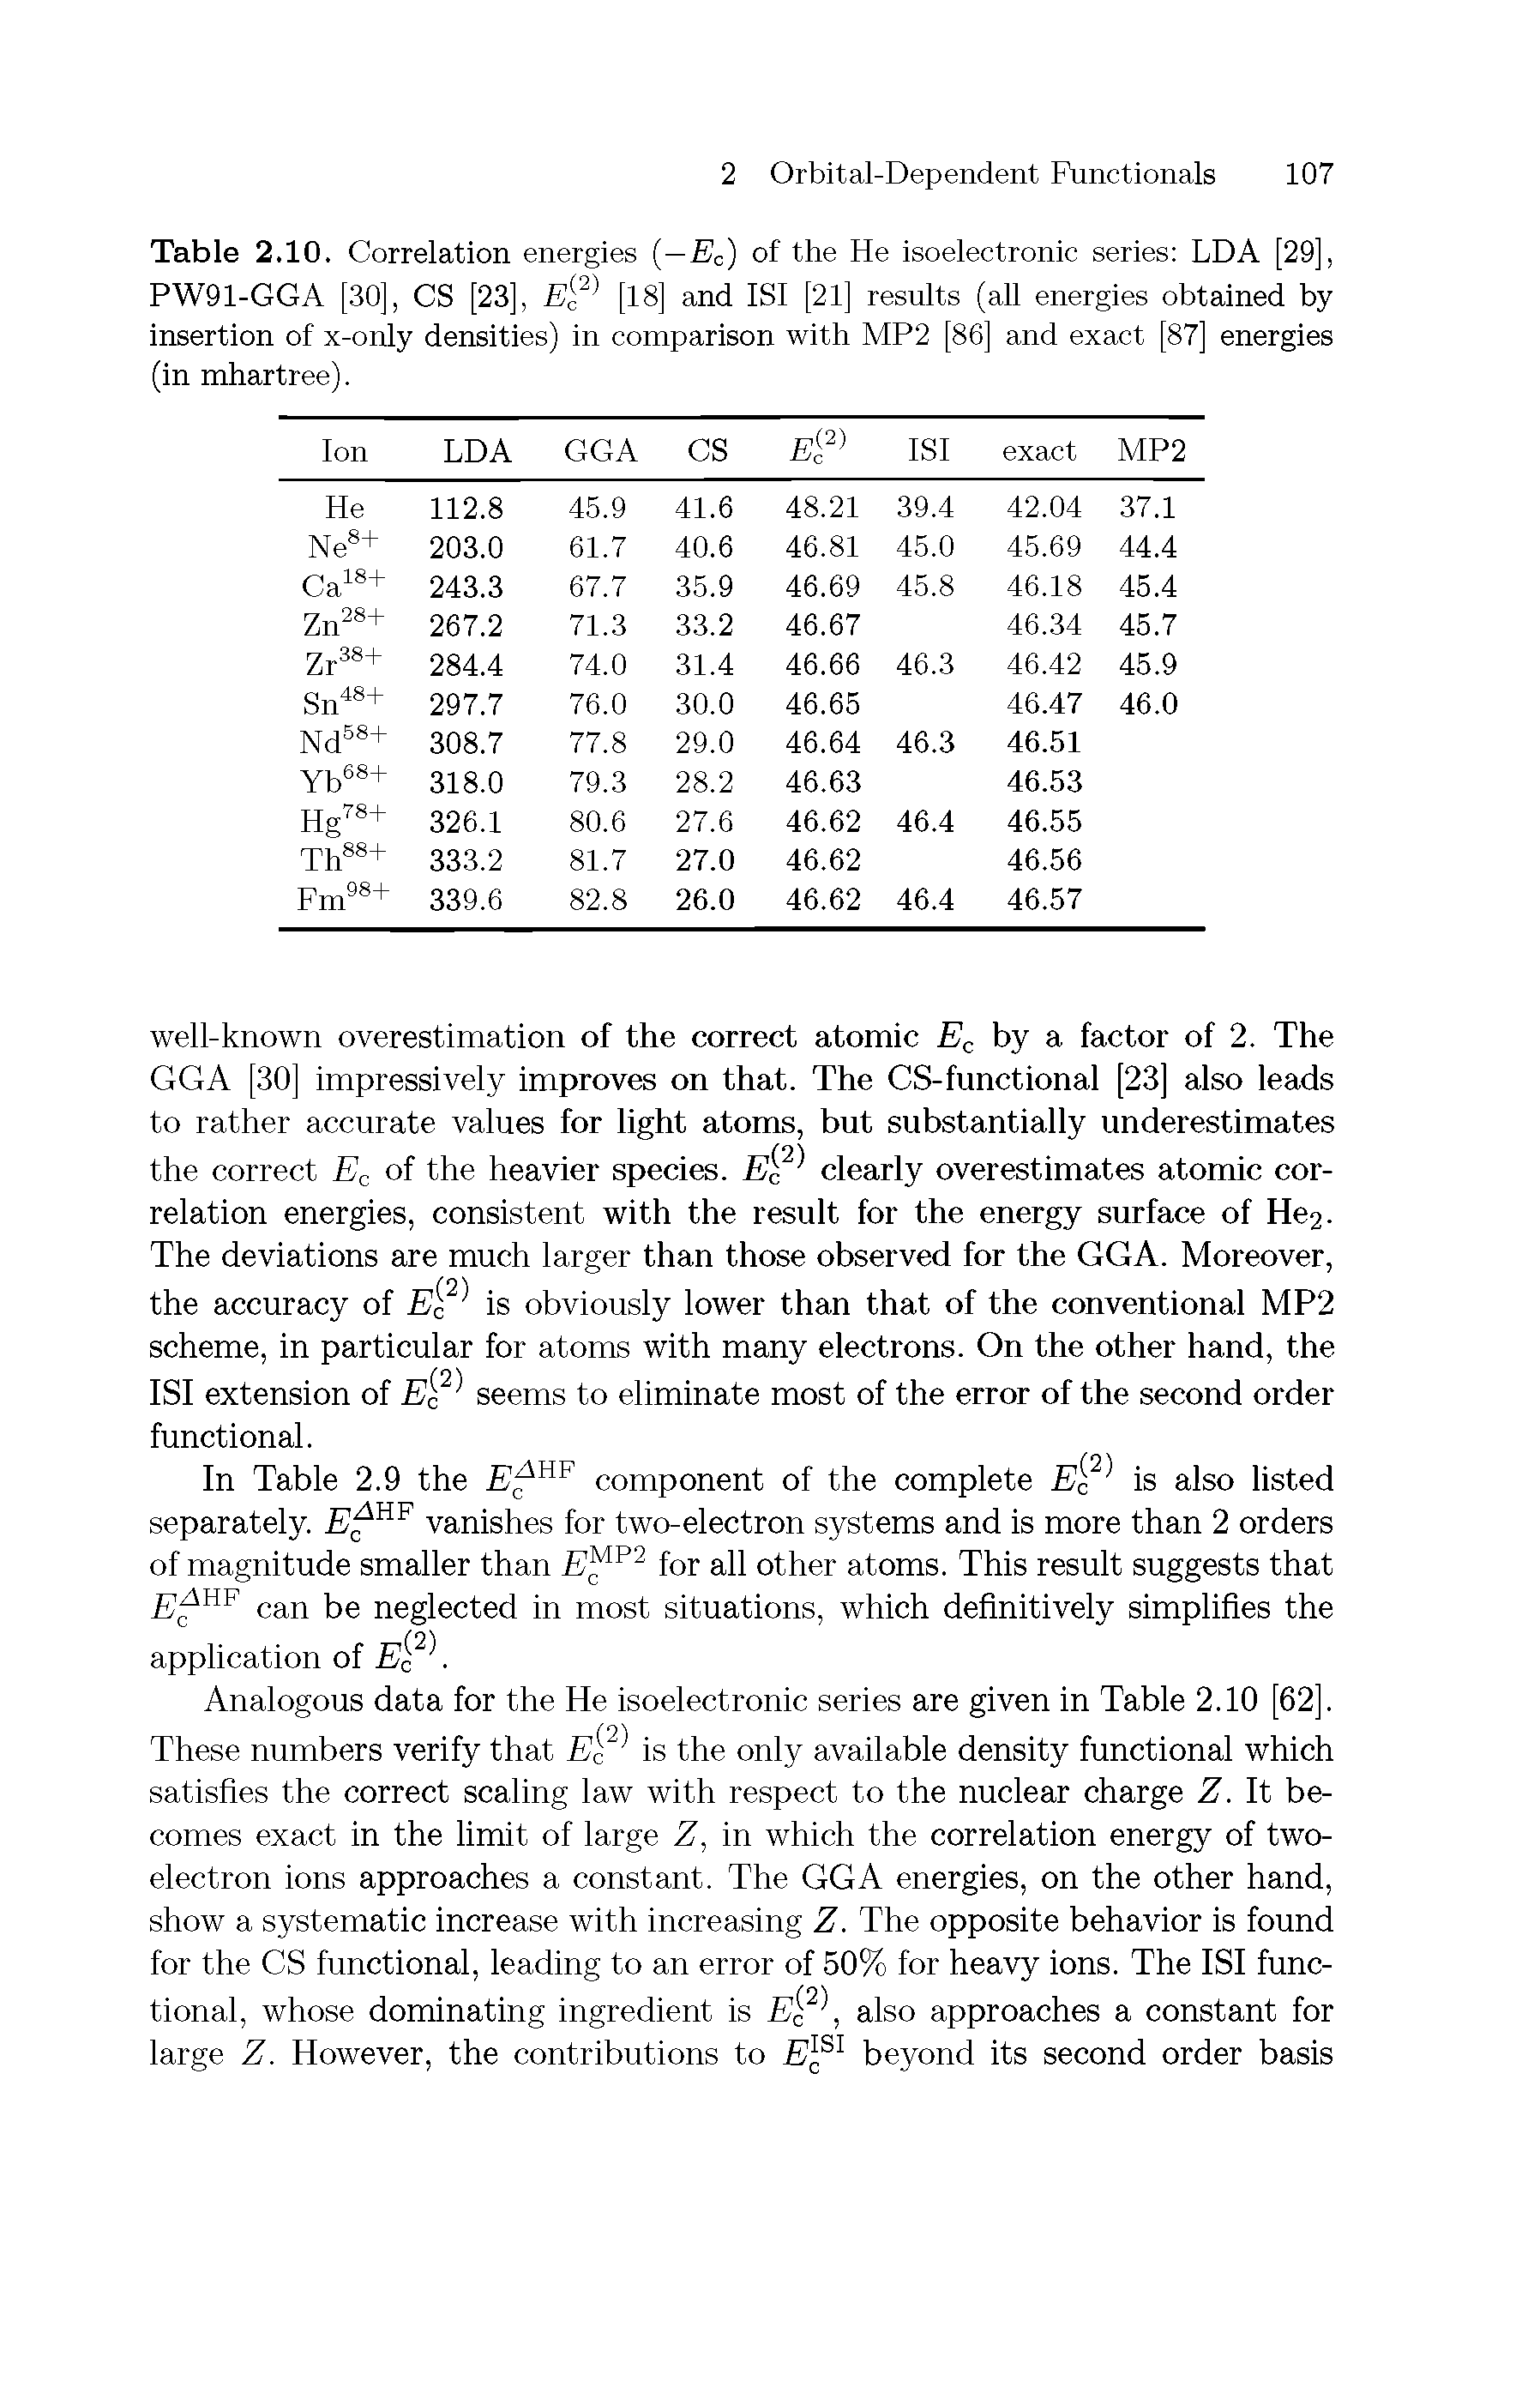 Table 2.10. Correlation energies —Ec) of the He isoelectronic series LDA [29], PW91-GGA [30], CS [23], [18] and ISl [21] results (all energies obtained by...